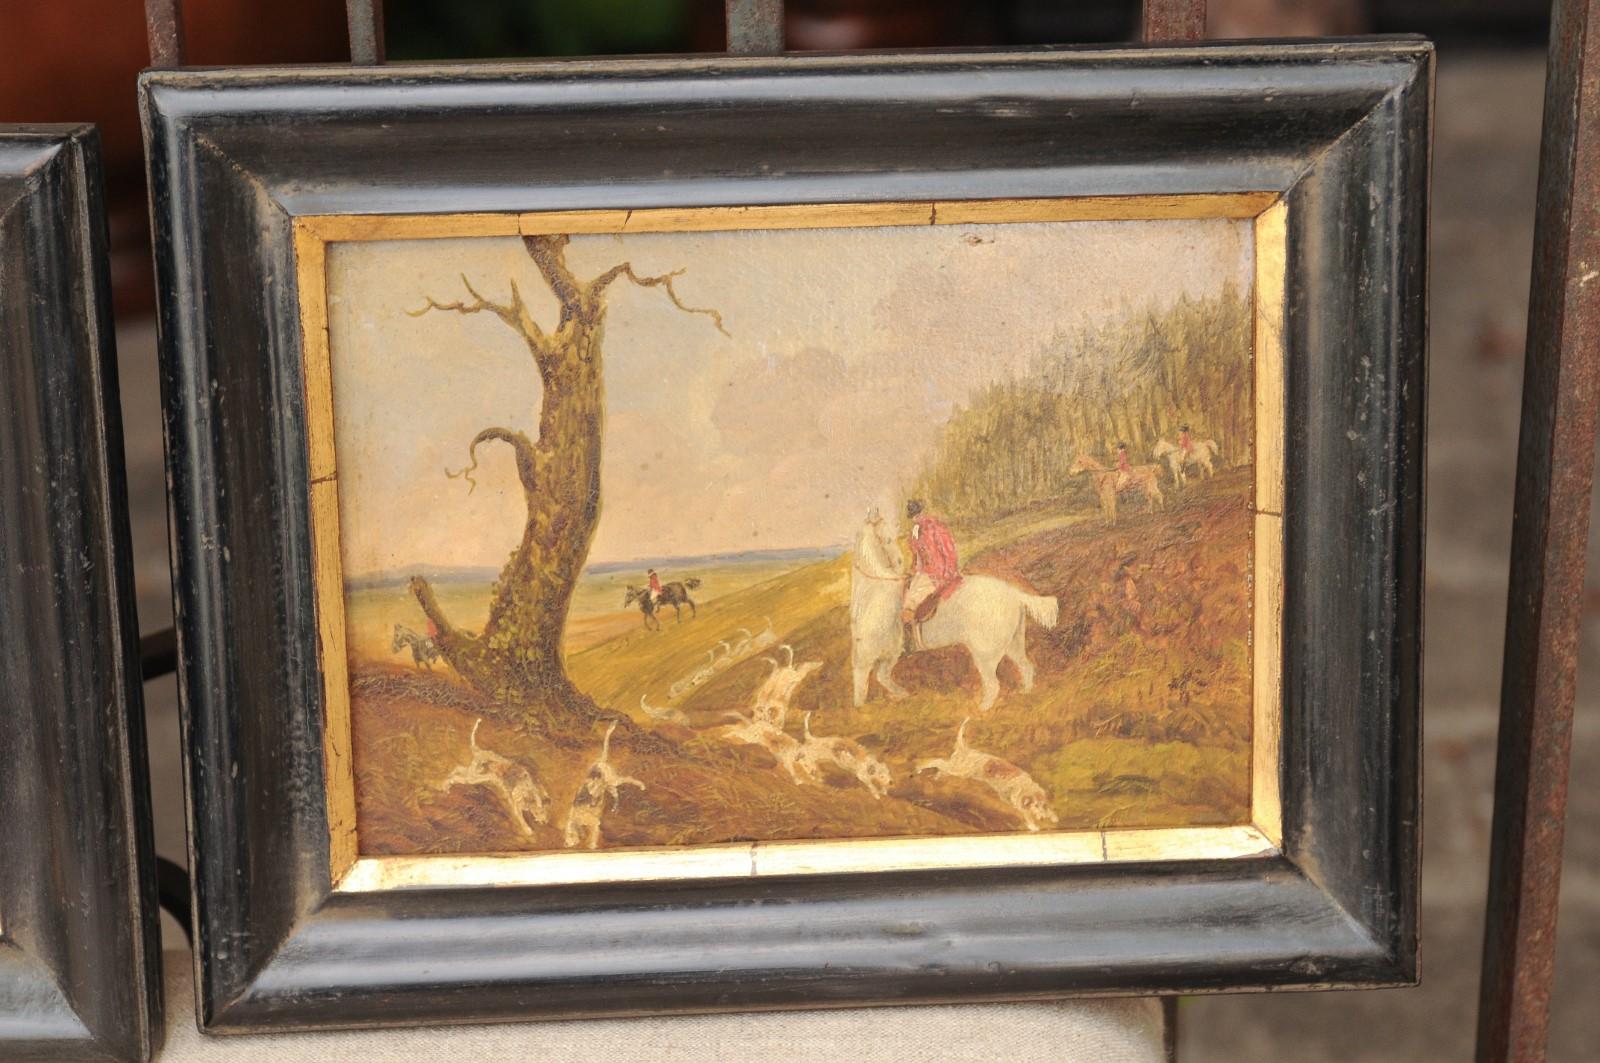 A set of four English framed oil on board paintings from the late 19th century, featuring hunting scenes. Born in England during the later years of the 19th century, each of this set of four oil on board paintings depicts a hunting scene. Featuring